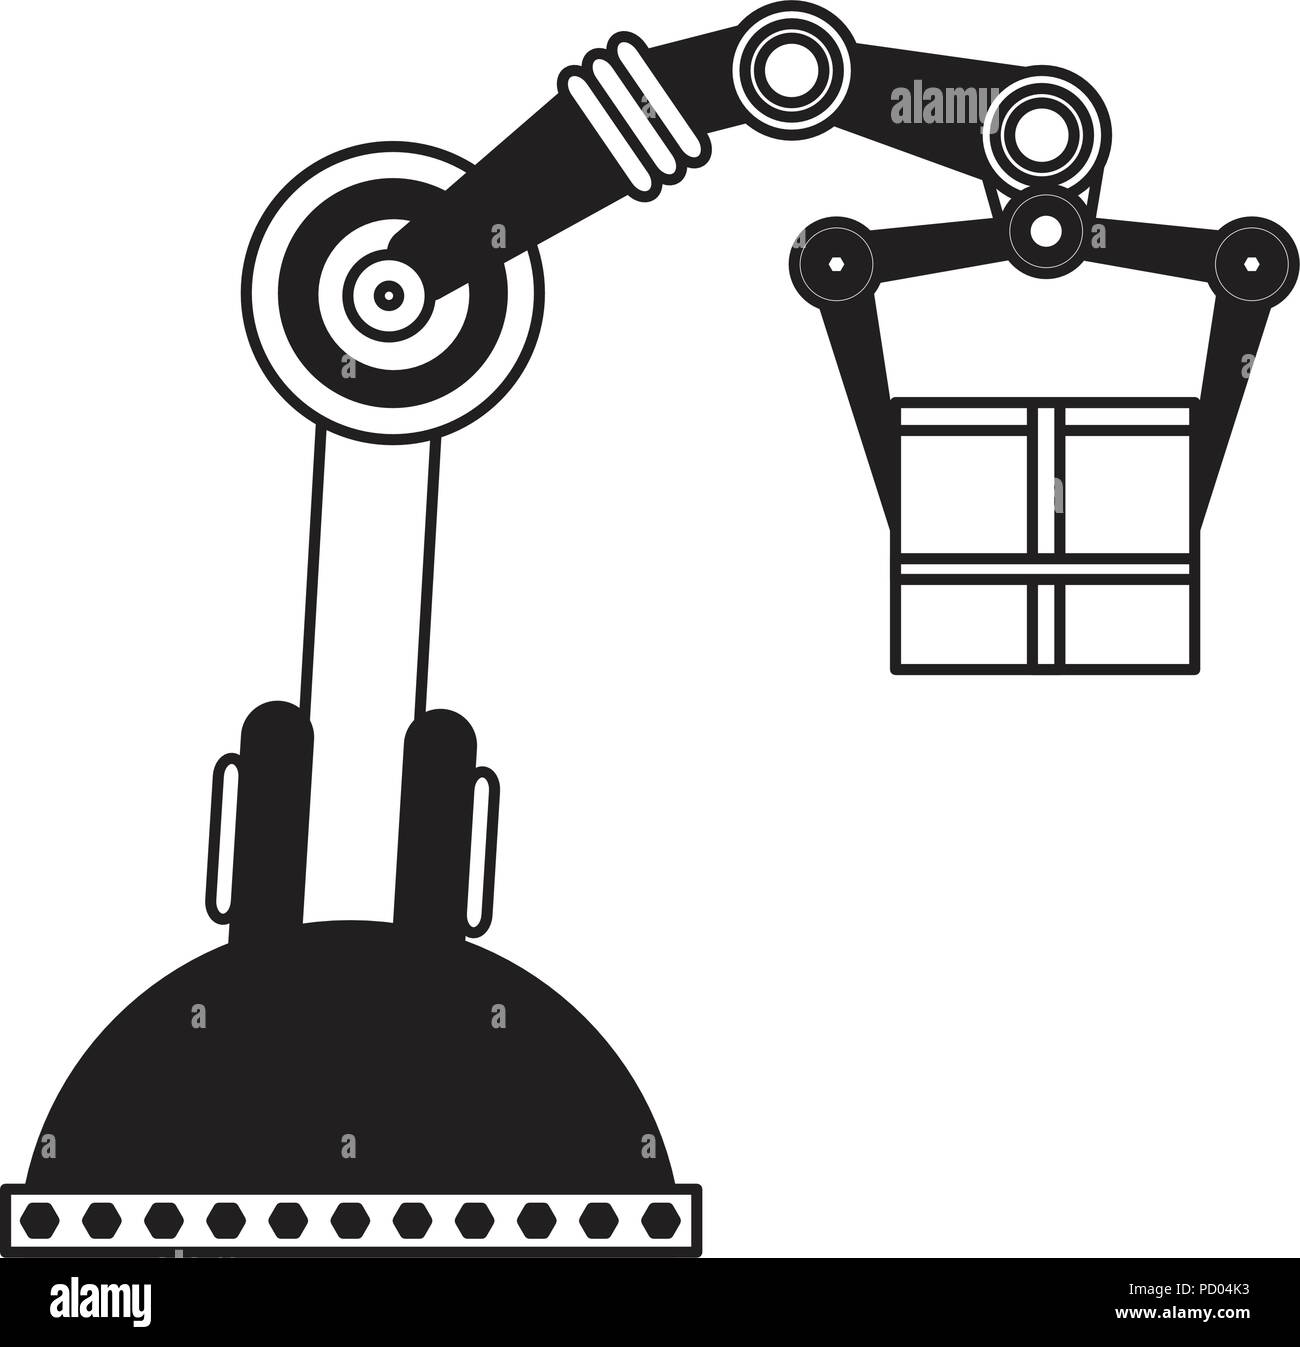 Isolated industrial robot arm icon Stock Vector